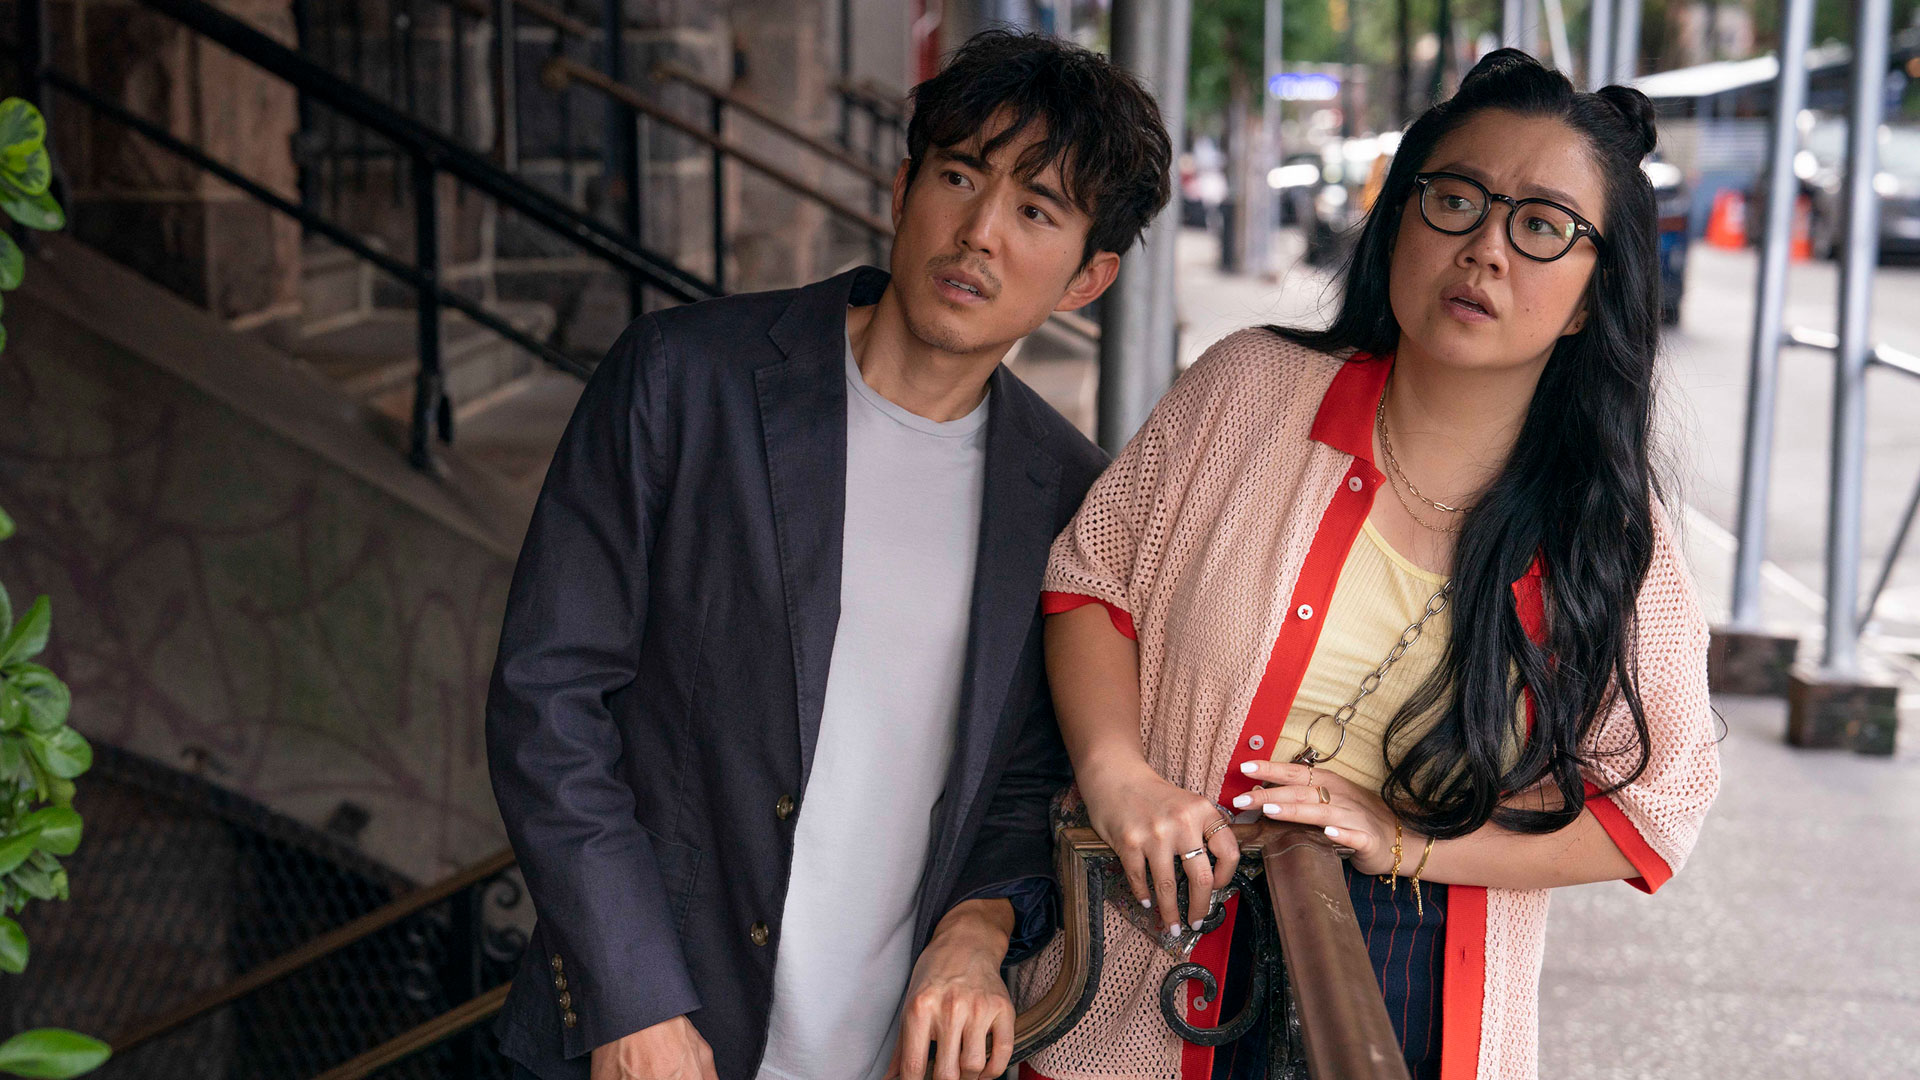 Review: ‘Shortcomings’Randall Park And Justin H. Min Are A Comedic Director/Actor Duo To Watch In This Well-Intentioned Comedy